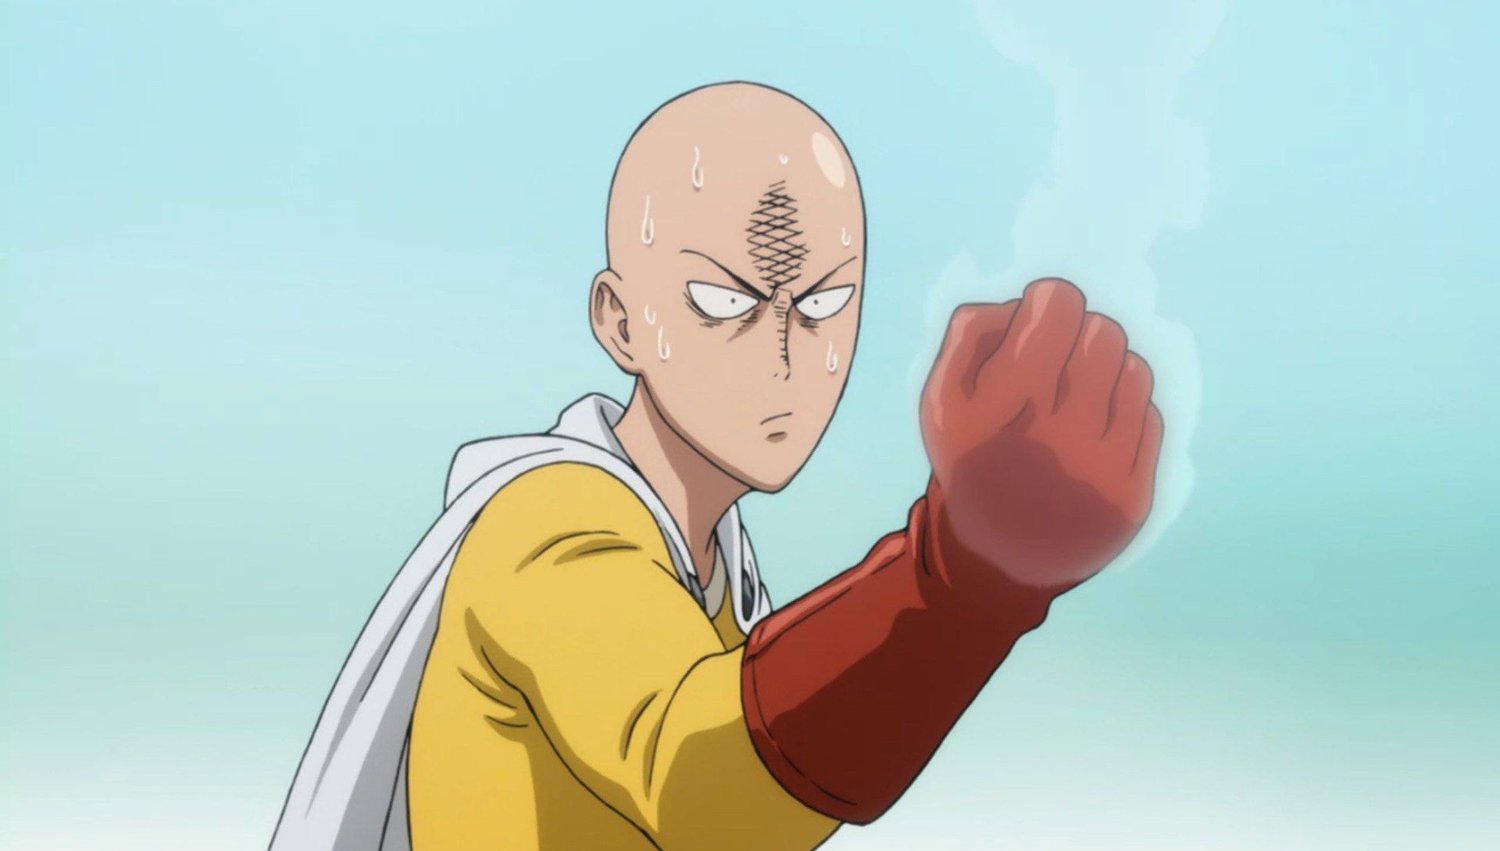 One Punch Man' Season 2 Airing Date and Voice Actors: Upcoming Anime Event  to Reveal Premiere Date? - EconoTimes